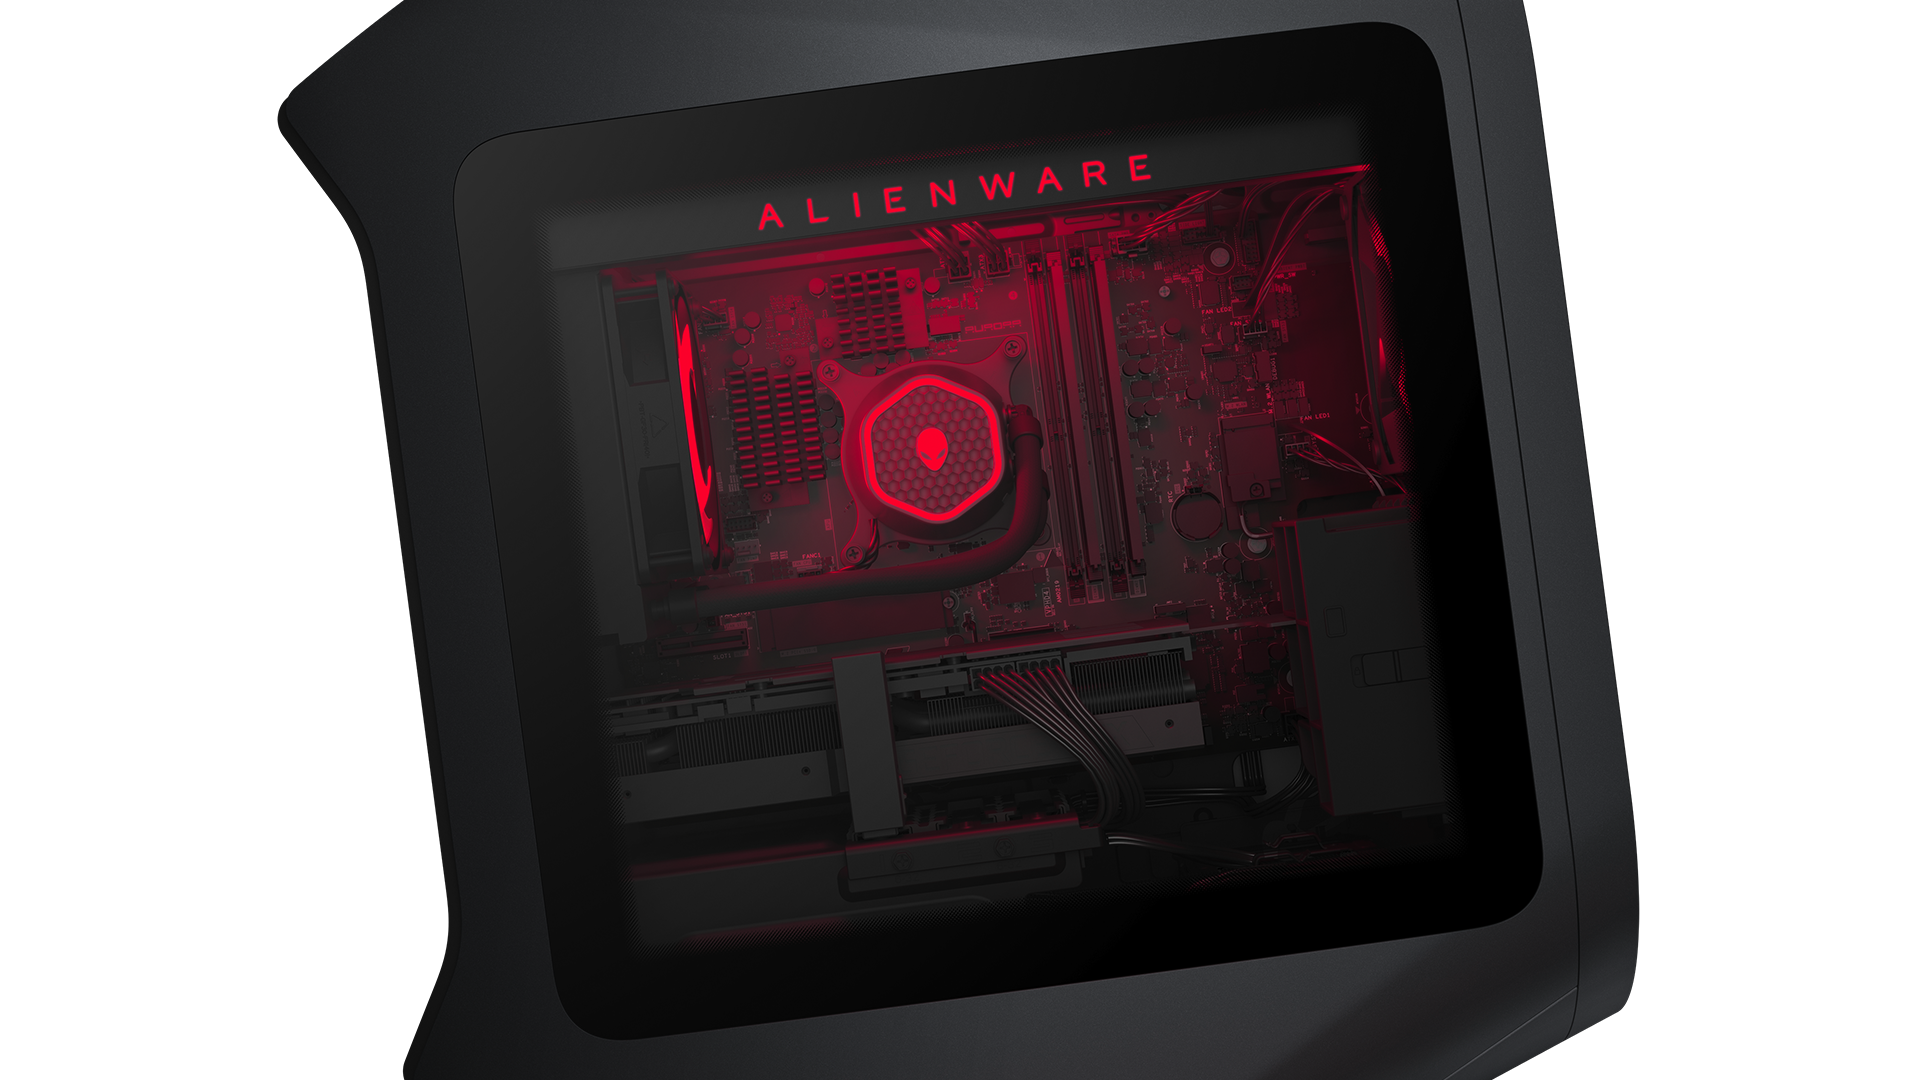 Alienware Goes Full AMD With Its New Gaming PCs and Laptops